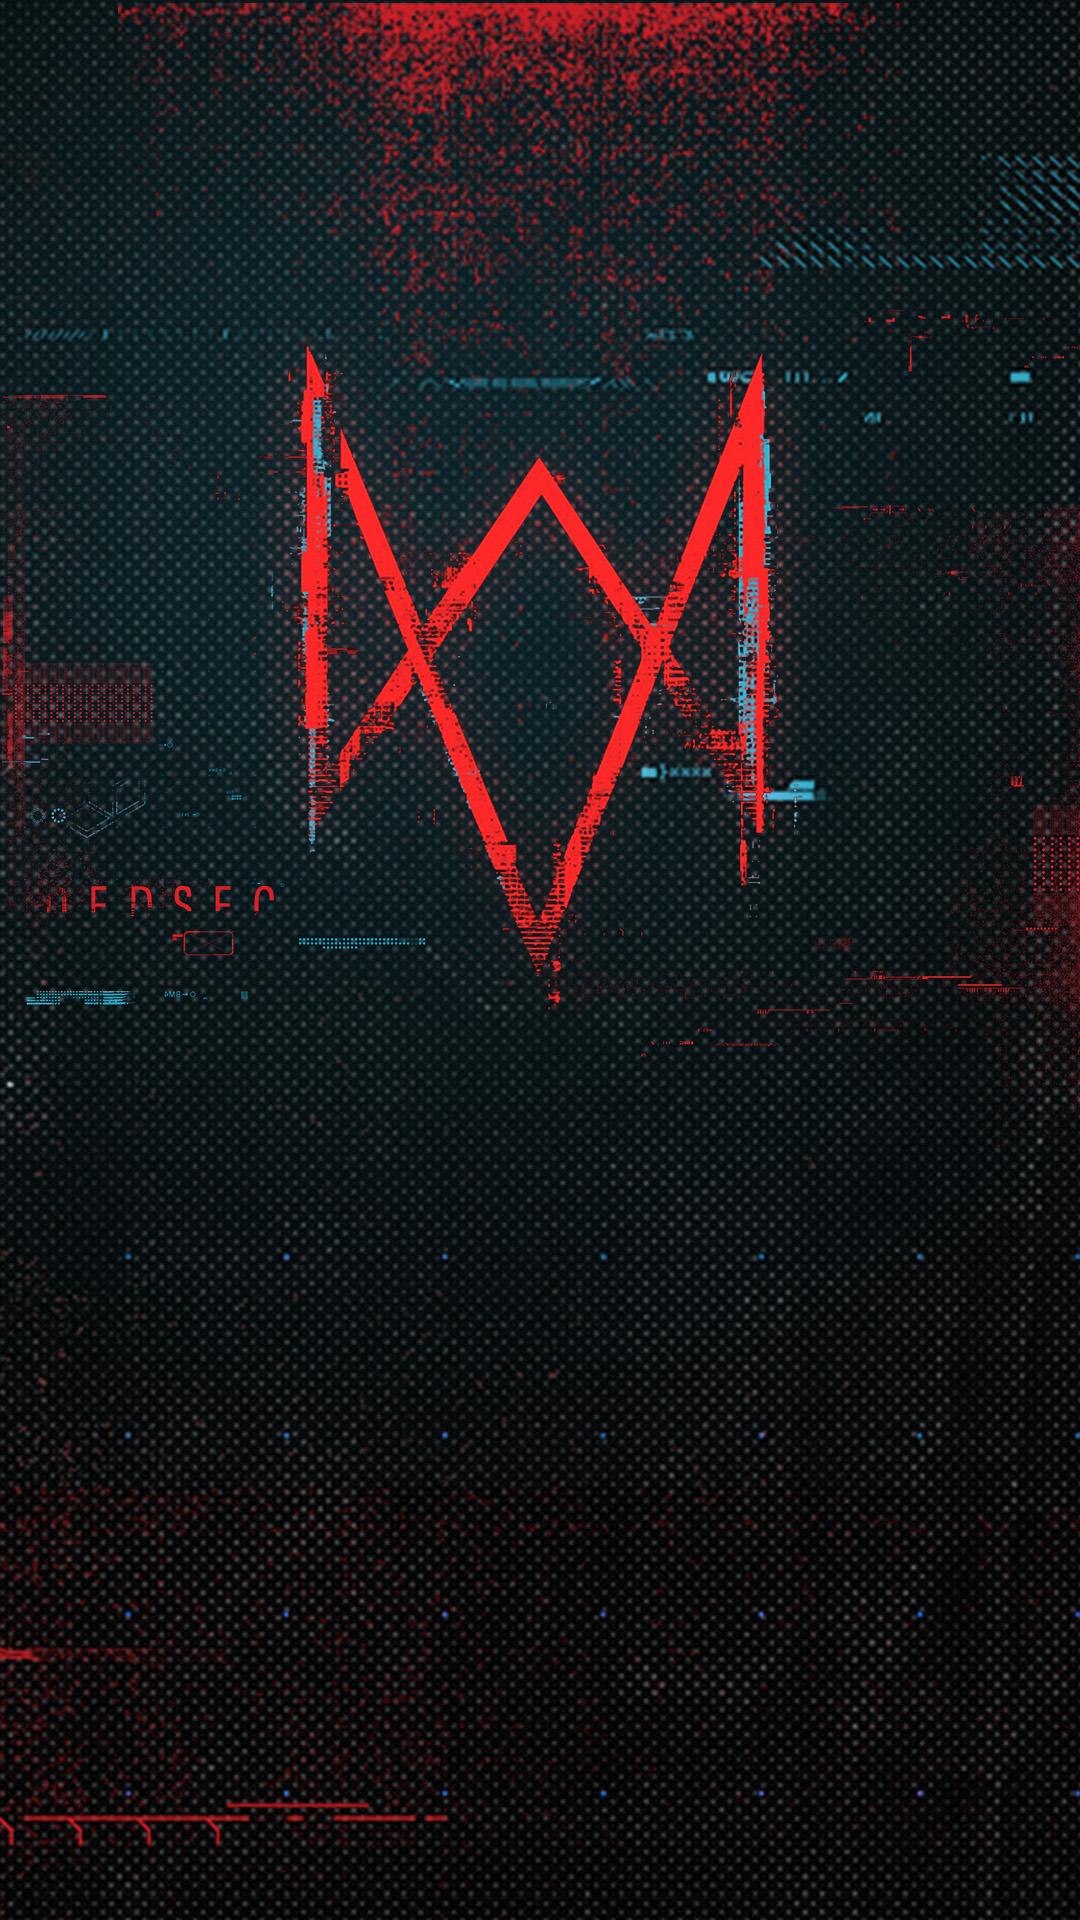 I made a phone wallpaper of the Watch Dogs Legion logo. Feel